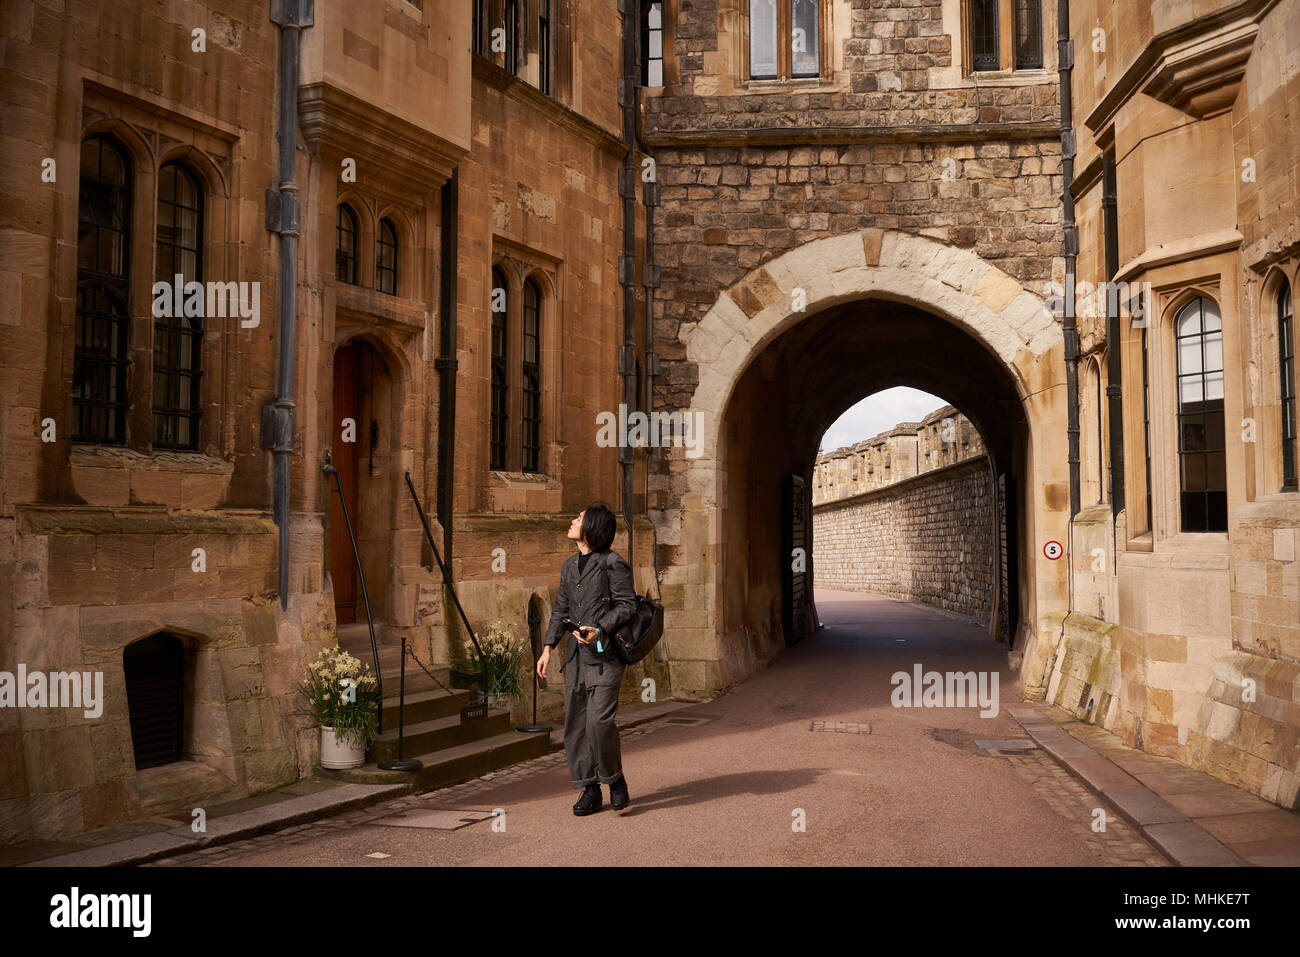 24 April 2018, Windsor, Great Britain: A visitor walking on the premises of the Windsor palace. Prince Harry and American Actress Meghan Markle will be saying their Wedding Vows on May 19, 2018 at the Windsor Palace. Photo: David Azia/dpa Stock Photo